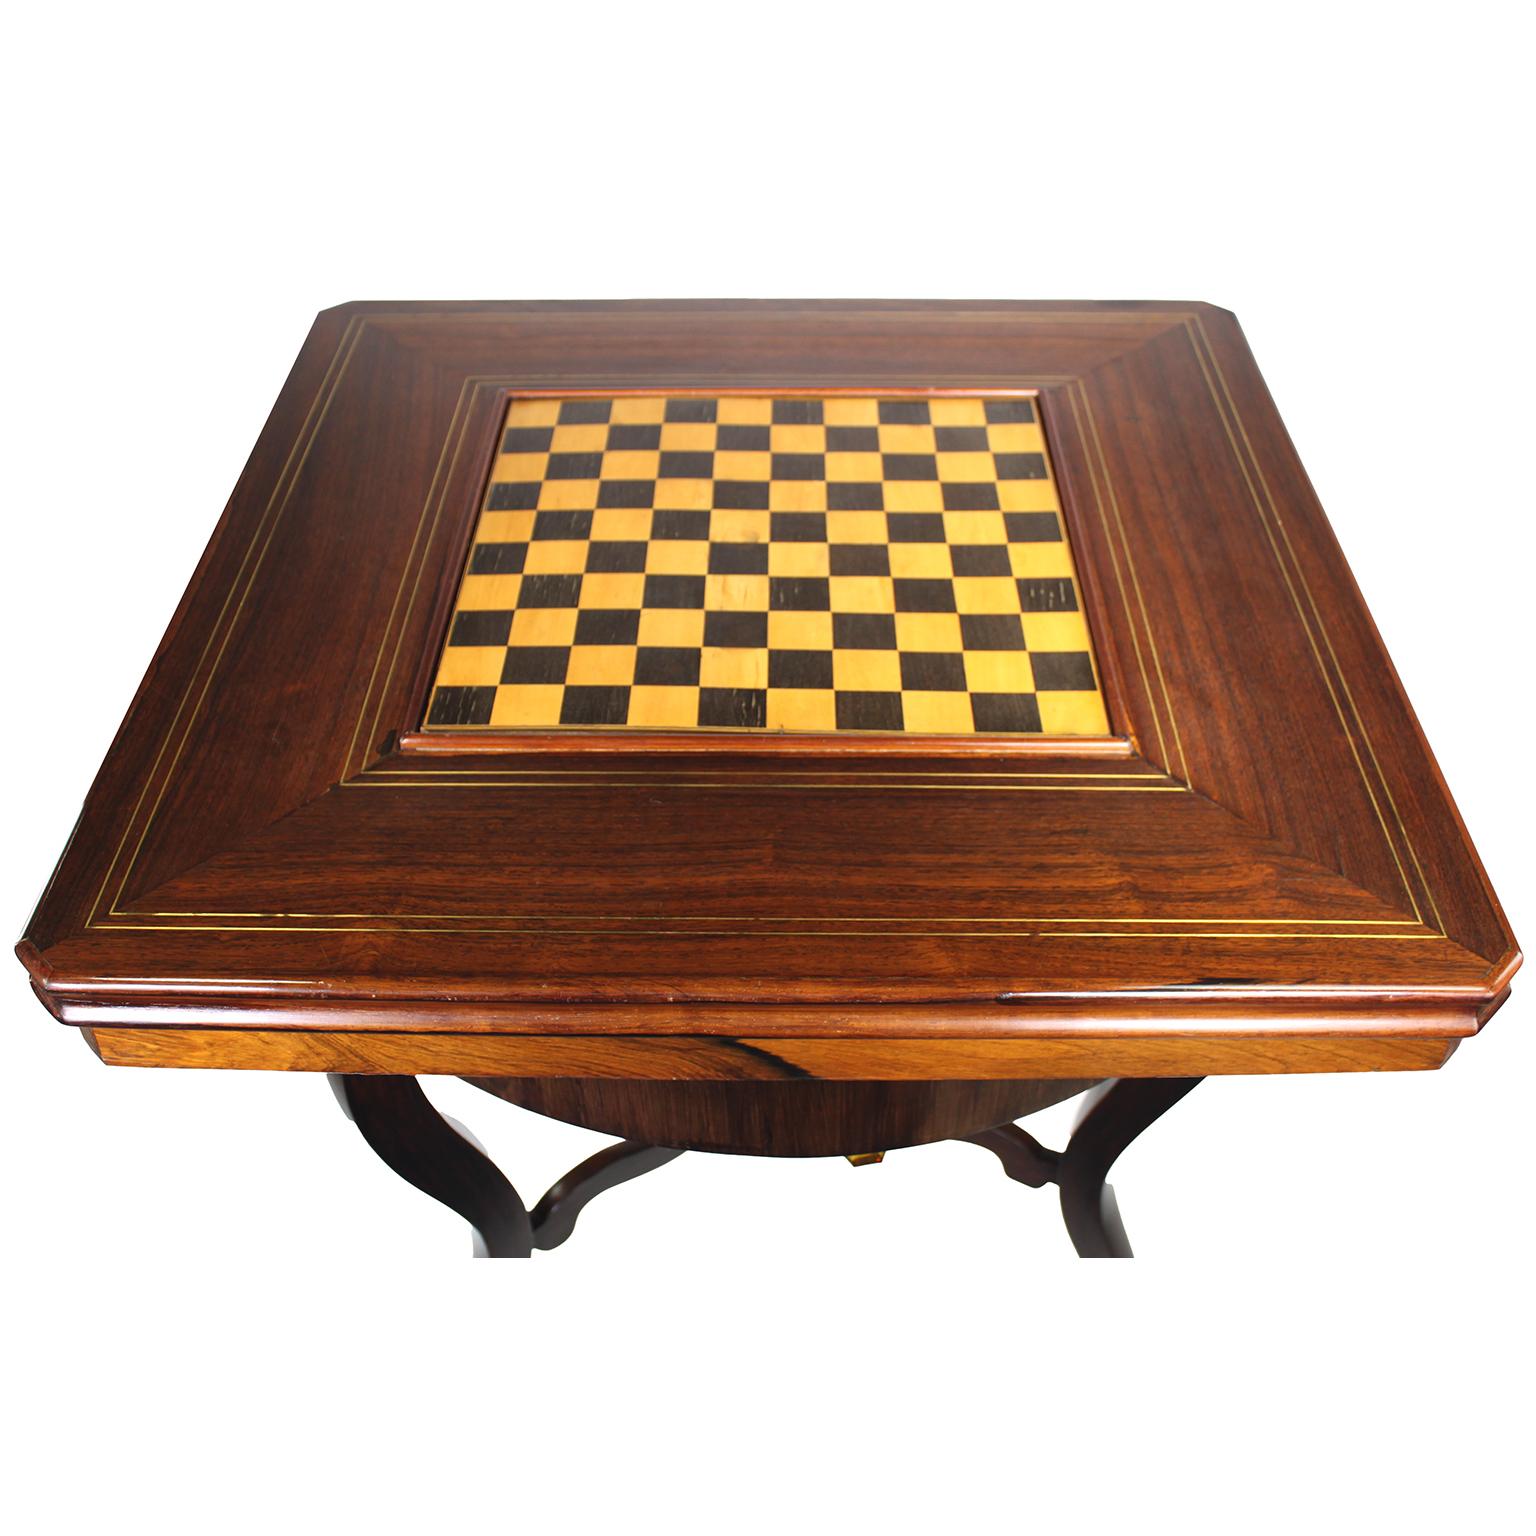 Rare French Napoleon III Carom Billiard-Checkers-Draughts Card Game Table 'THIS' In Good Condition For Sale In Los Angeles, CA